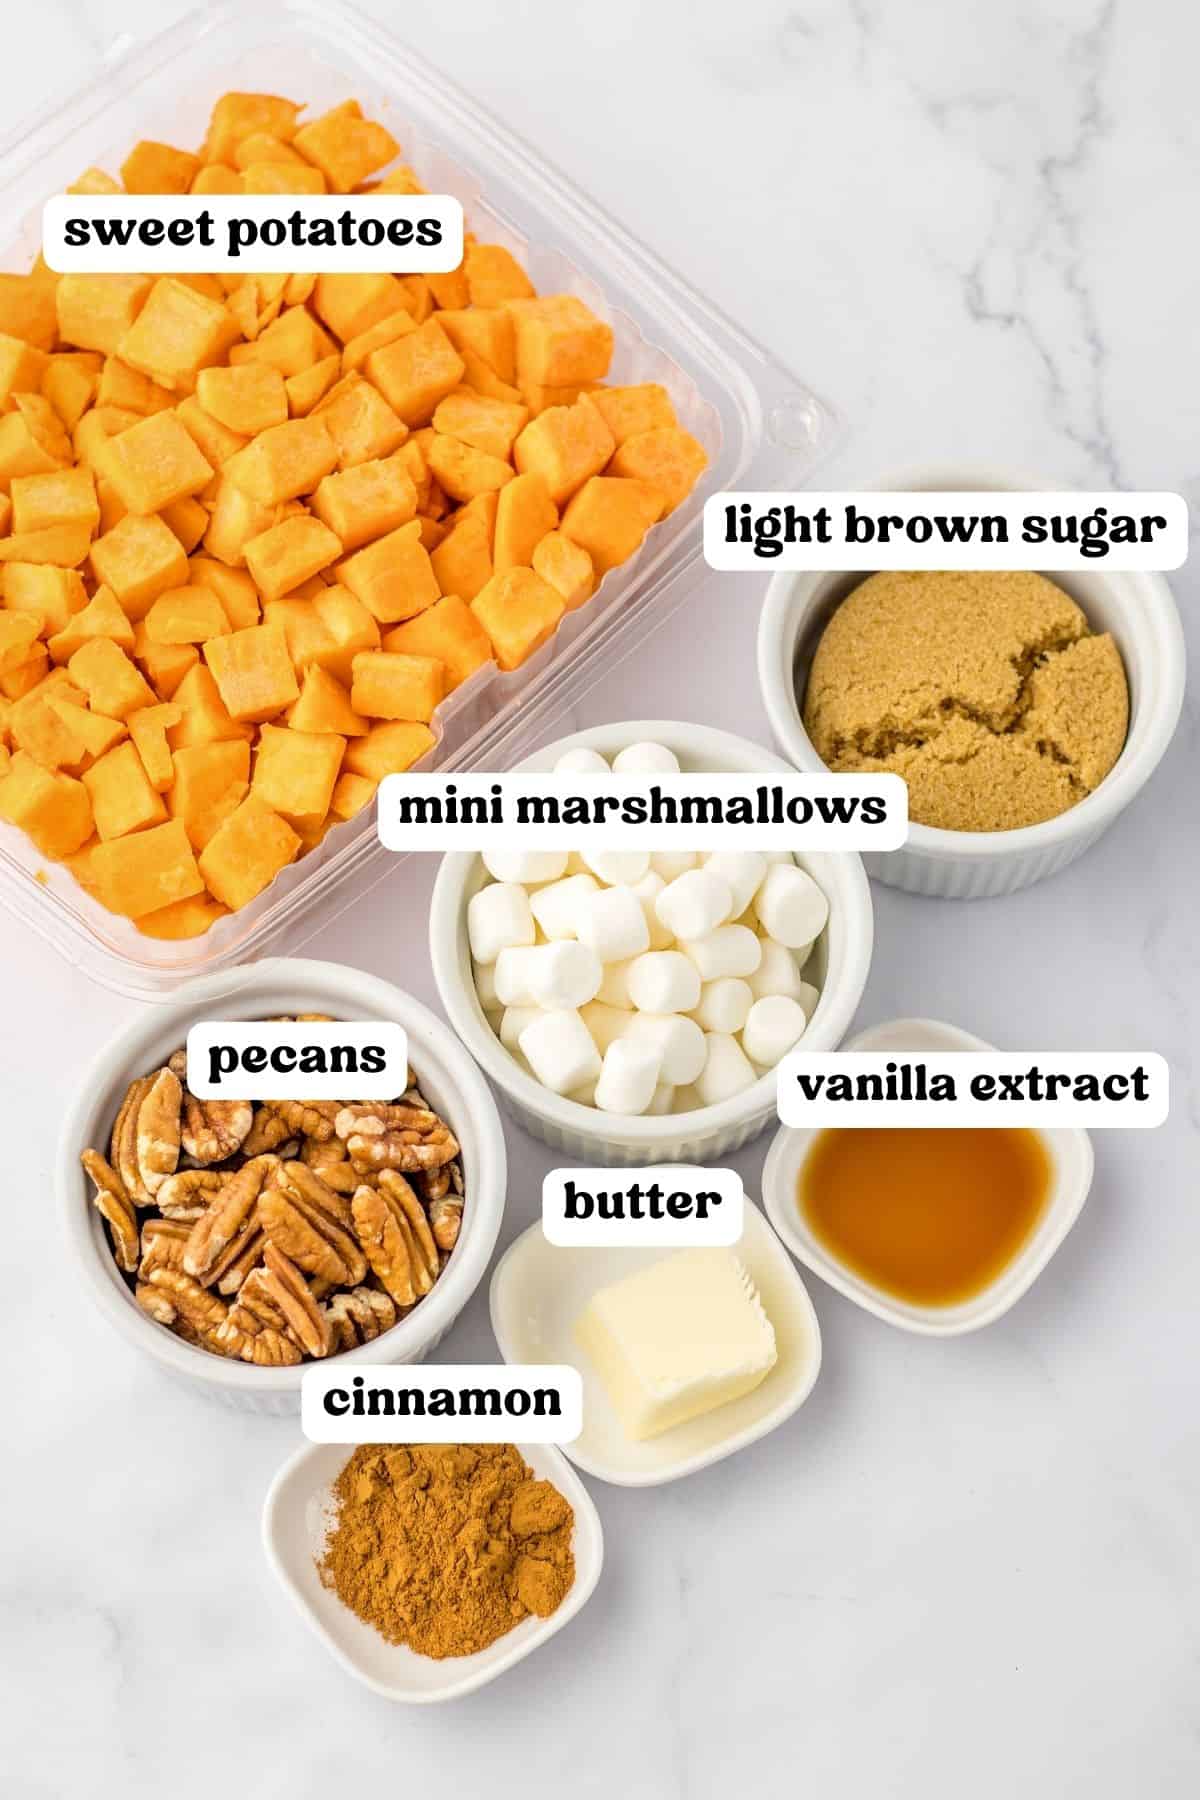 Ingredients on countertop: diced sweet potatoes, light brown sugar, vanilla extract, mini marshmallows, pecans, butter and cinnamon.